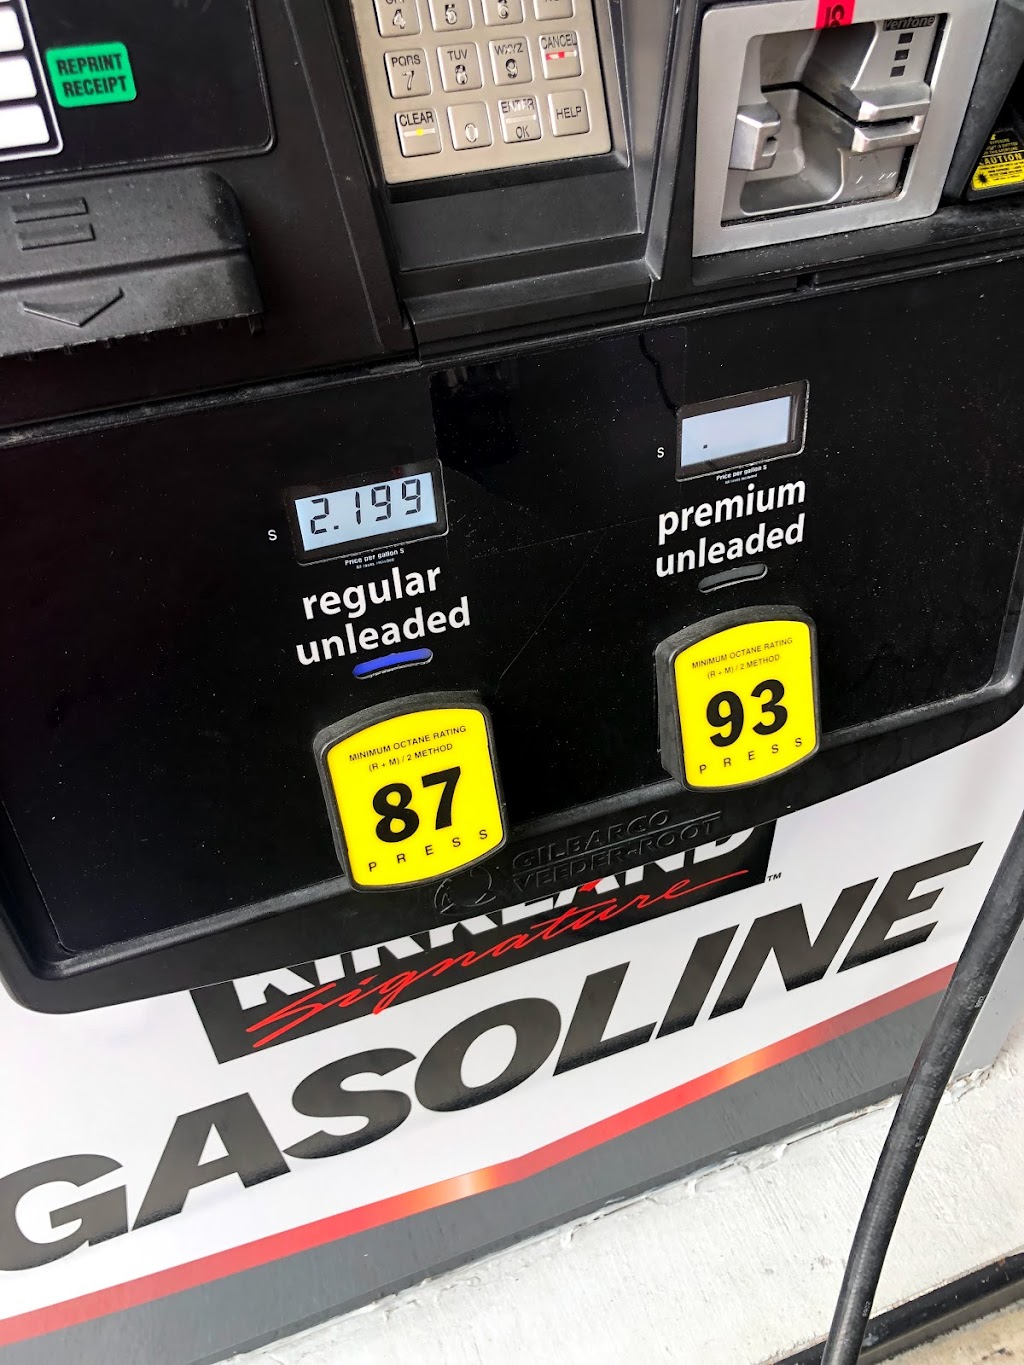 Costco Gas Station | 2655 Gulf to Bay Blvd, Clearwater, FL 33759, USA | Phone: (727) 373-1951